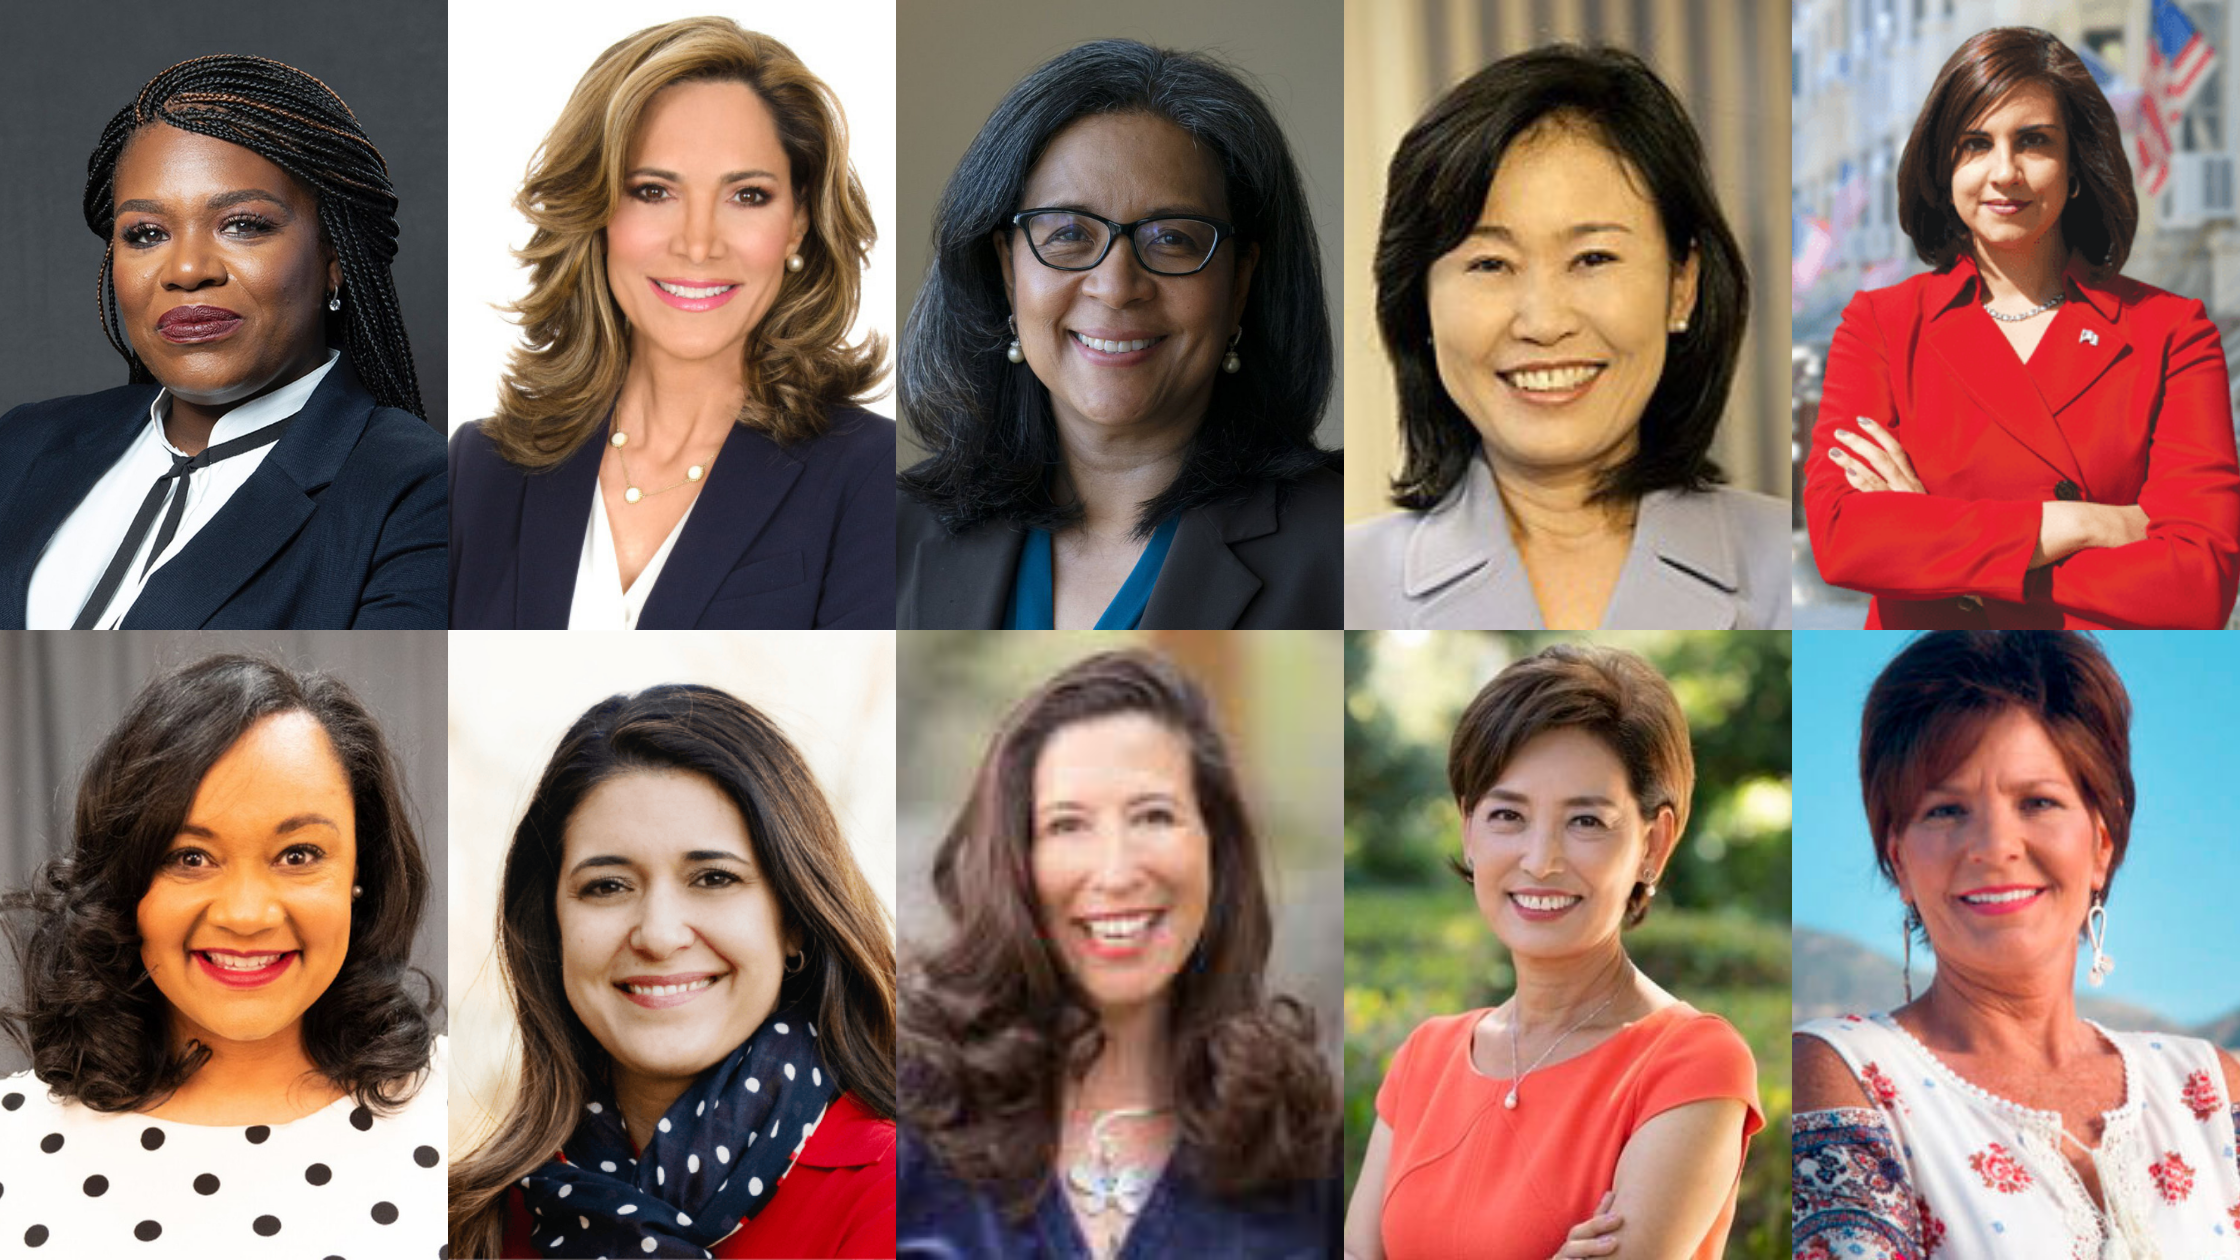 A record number of women ran for office in 2020, passing the record set in the 2018 midterm election. Check out some of the firsts in the 117th Congress.